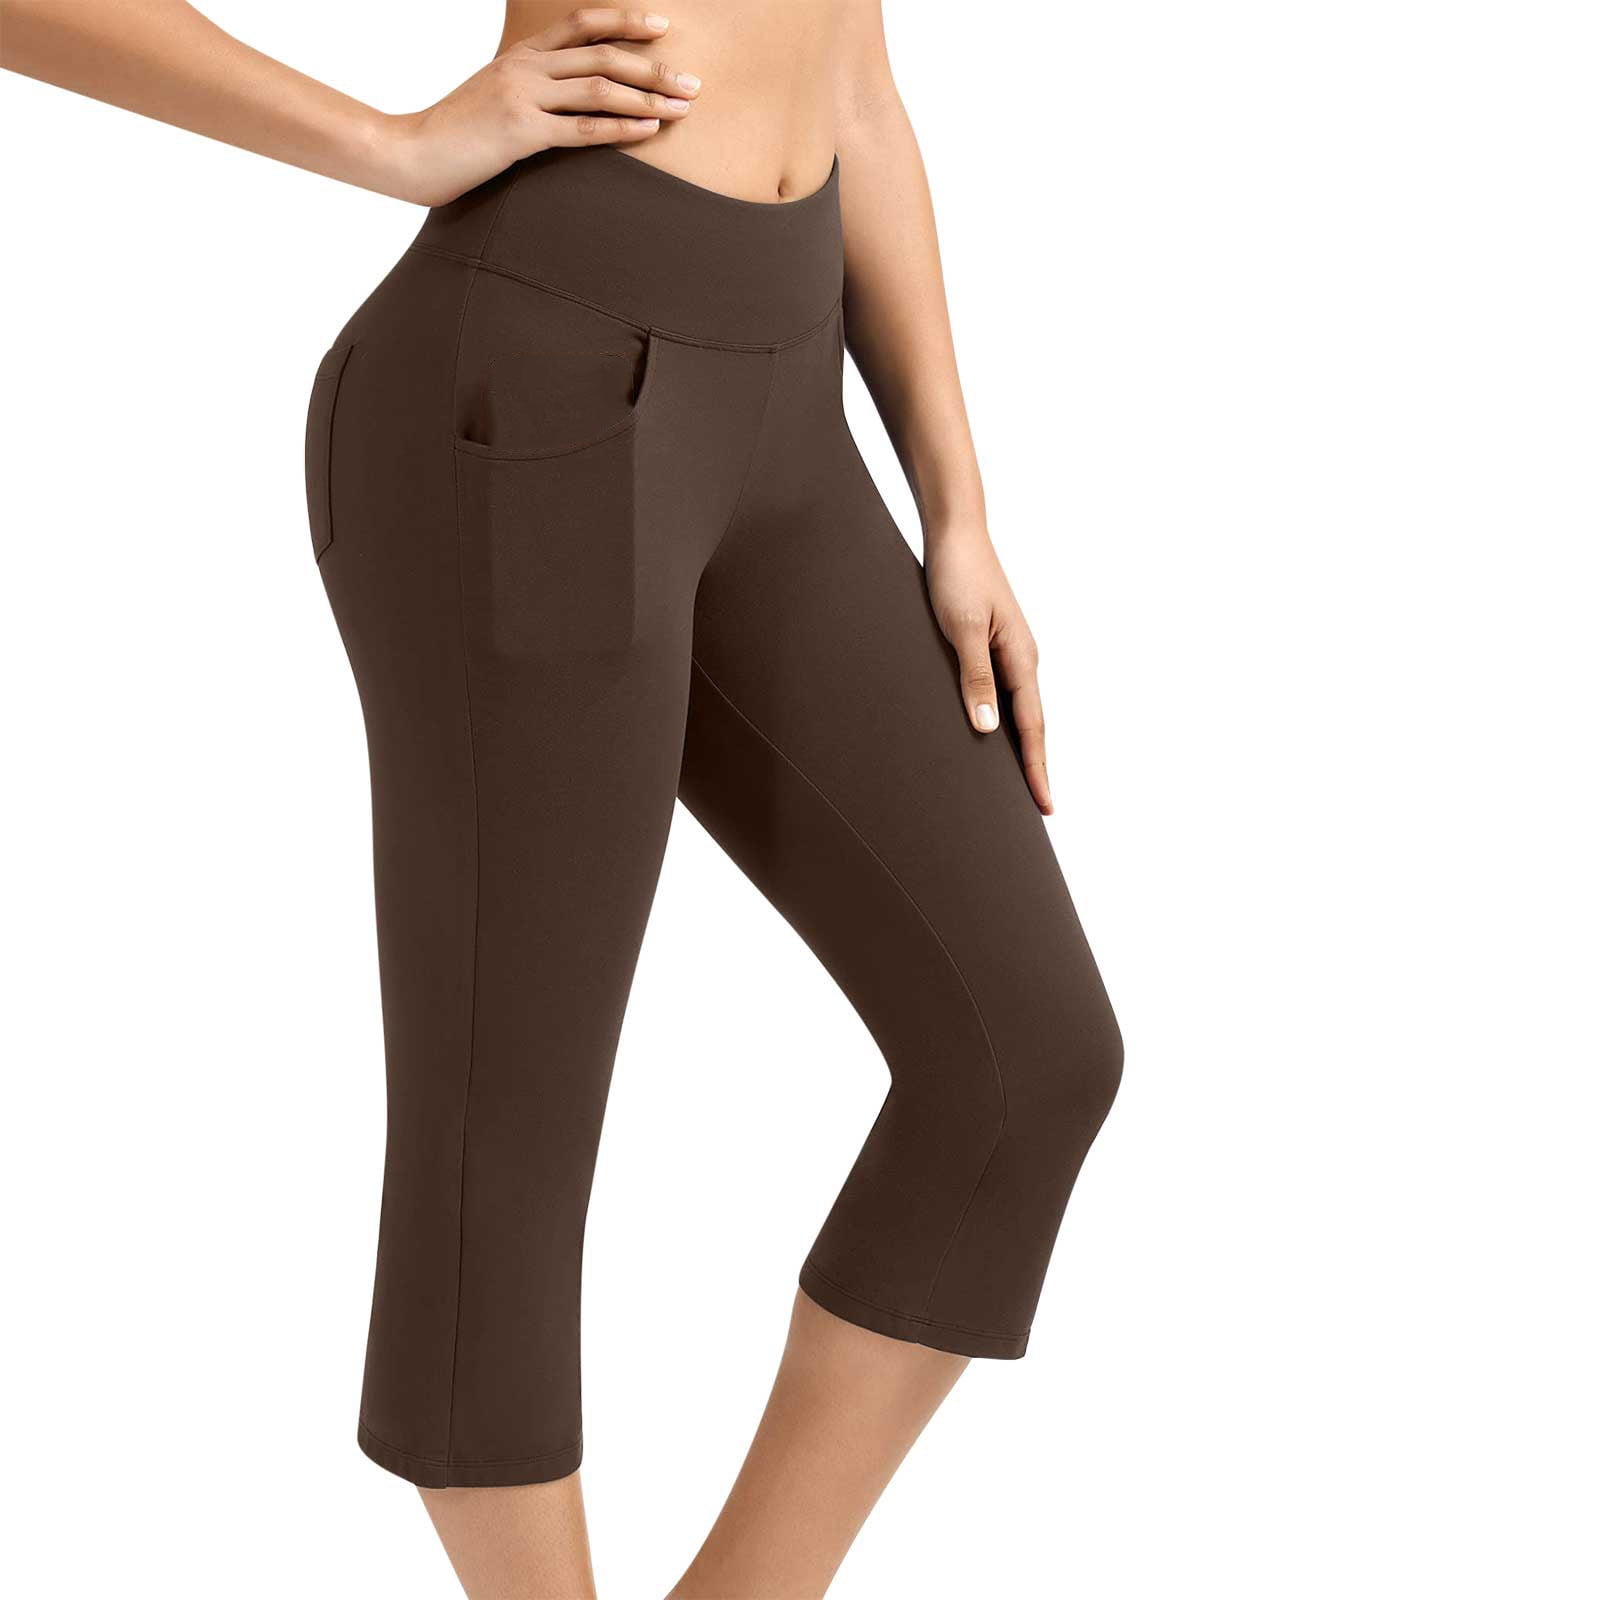 YYDGH High Waisted Yoga Pants for Women with Pockets Capri